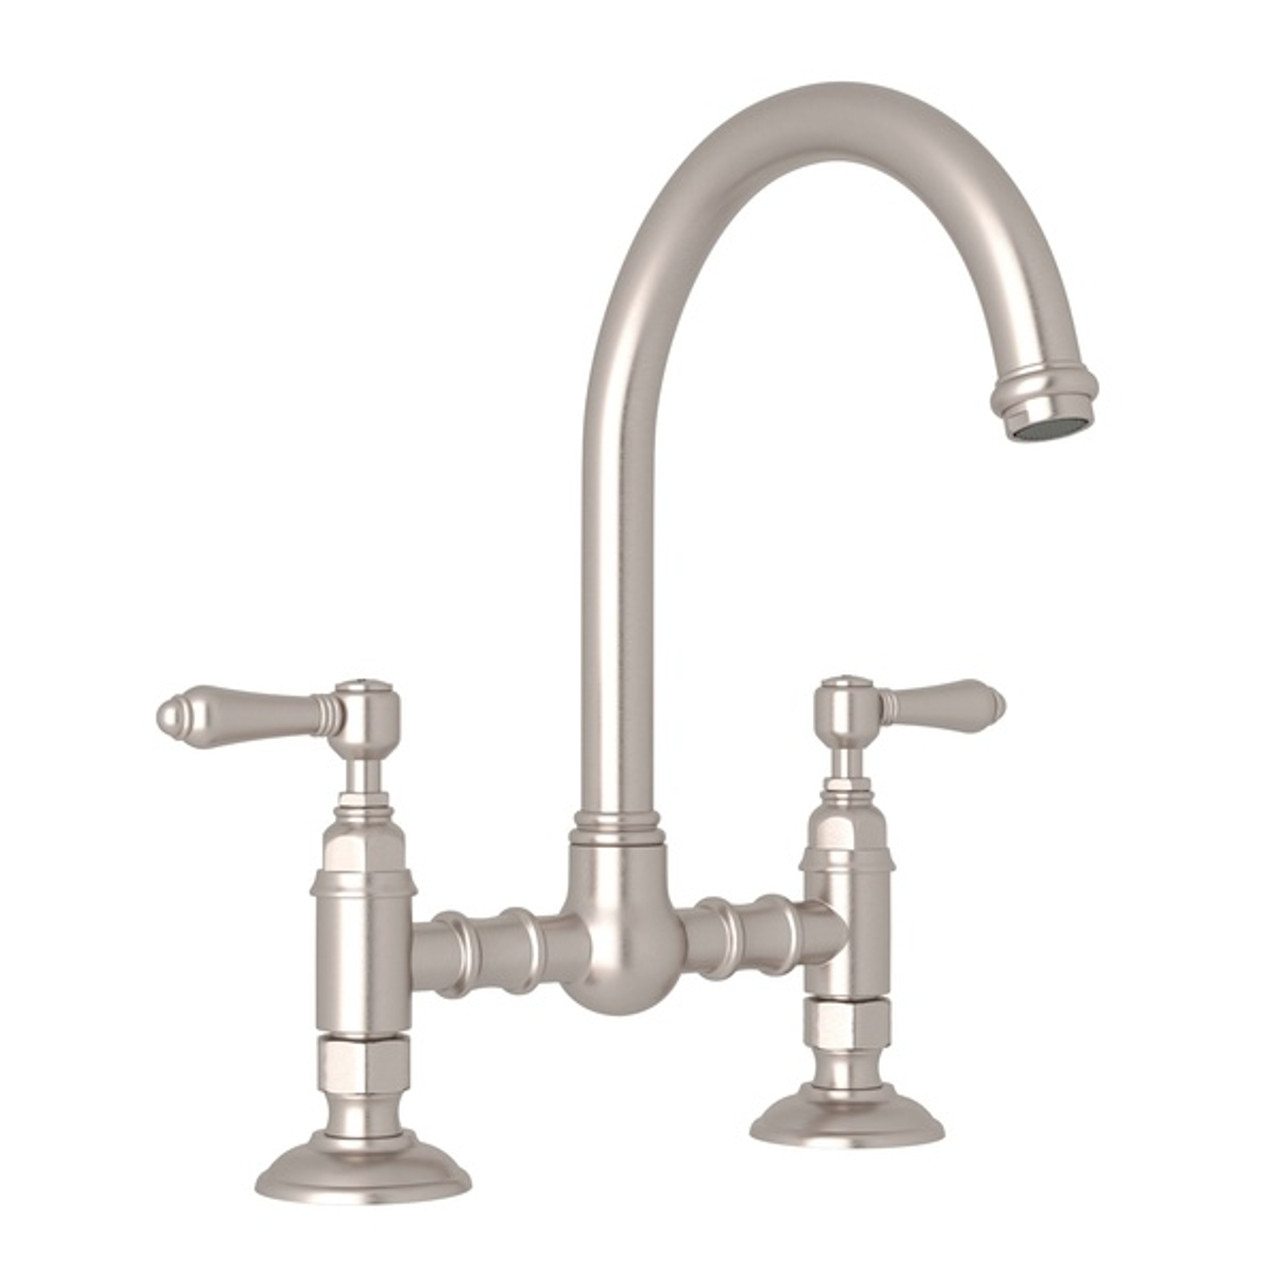 Rohl Italian Kitchen San Julio Bridge Faucet With Double-Lever Handle in  Satin Nickel A1461LMSTN-2 Online